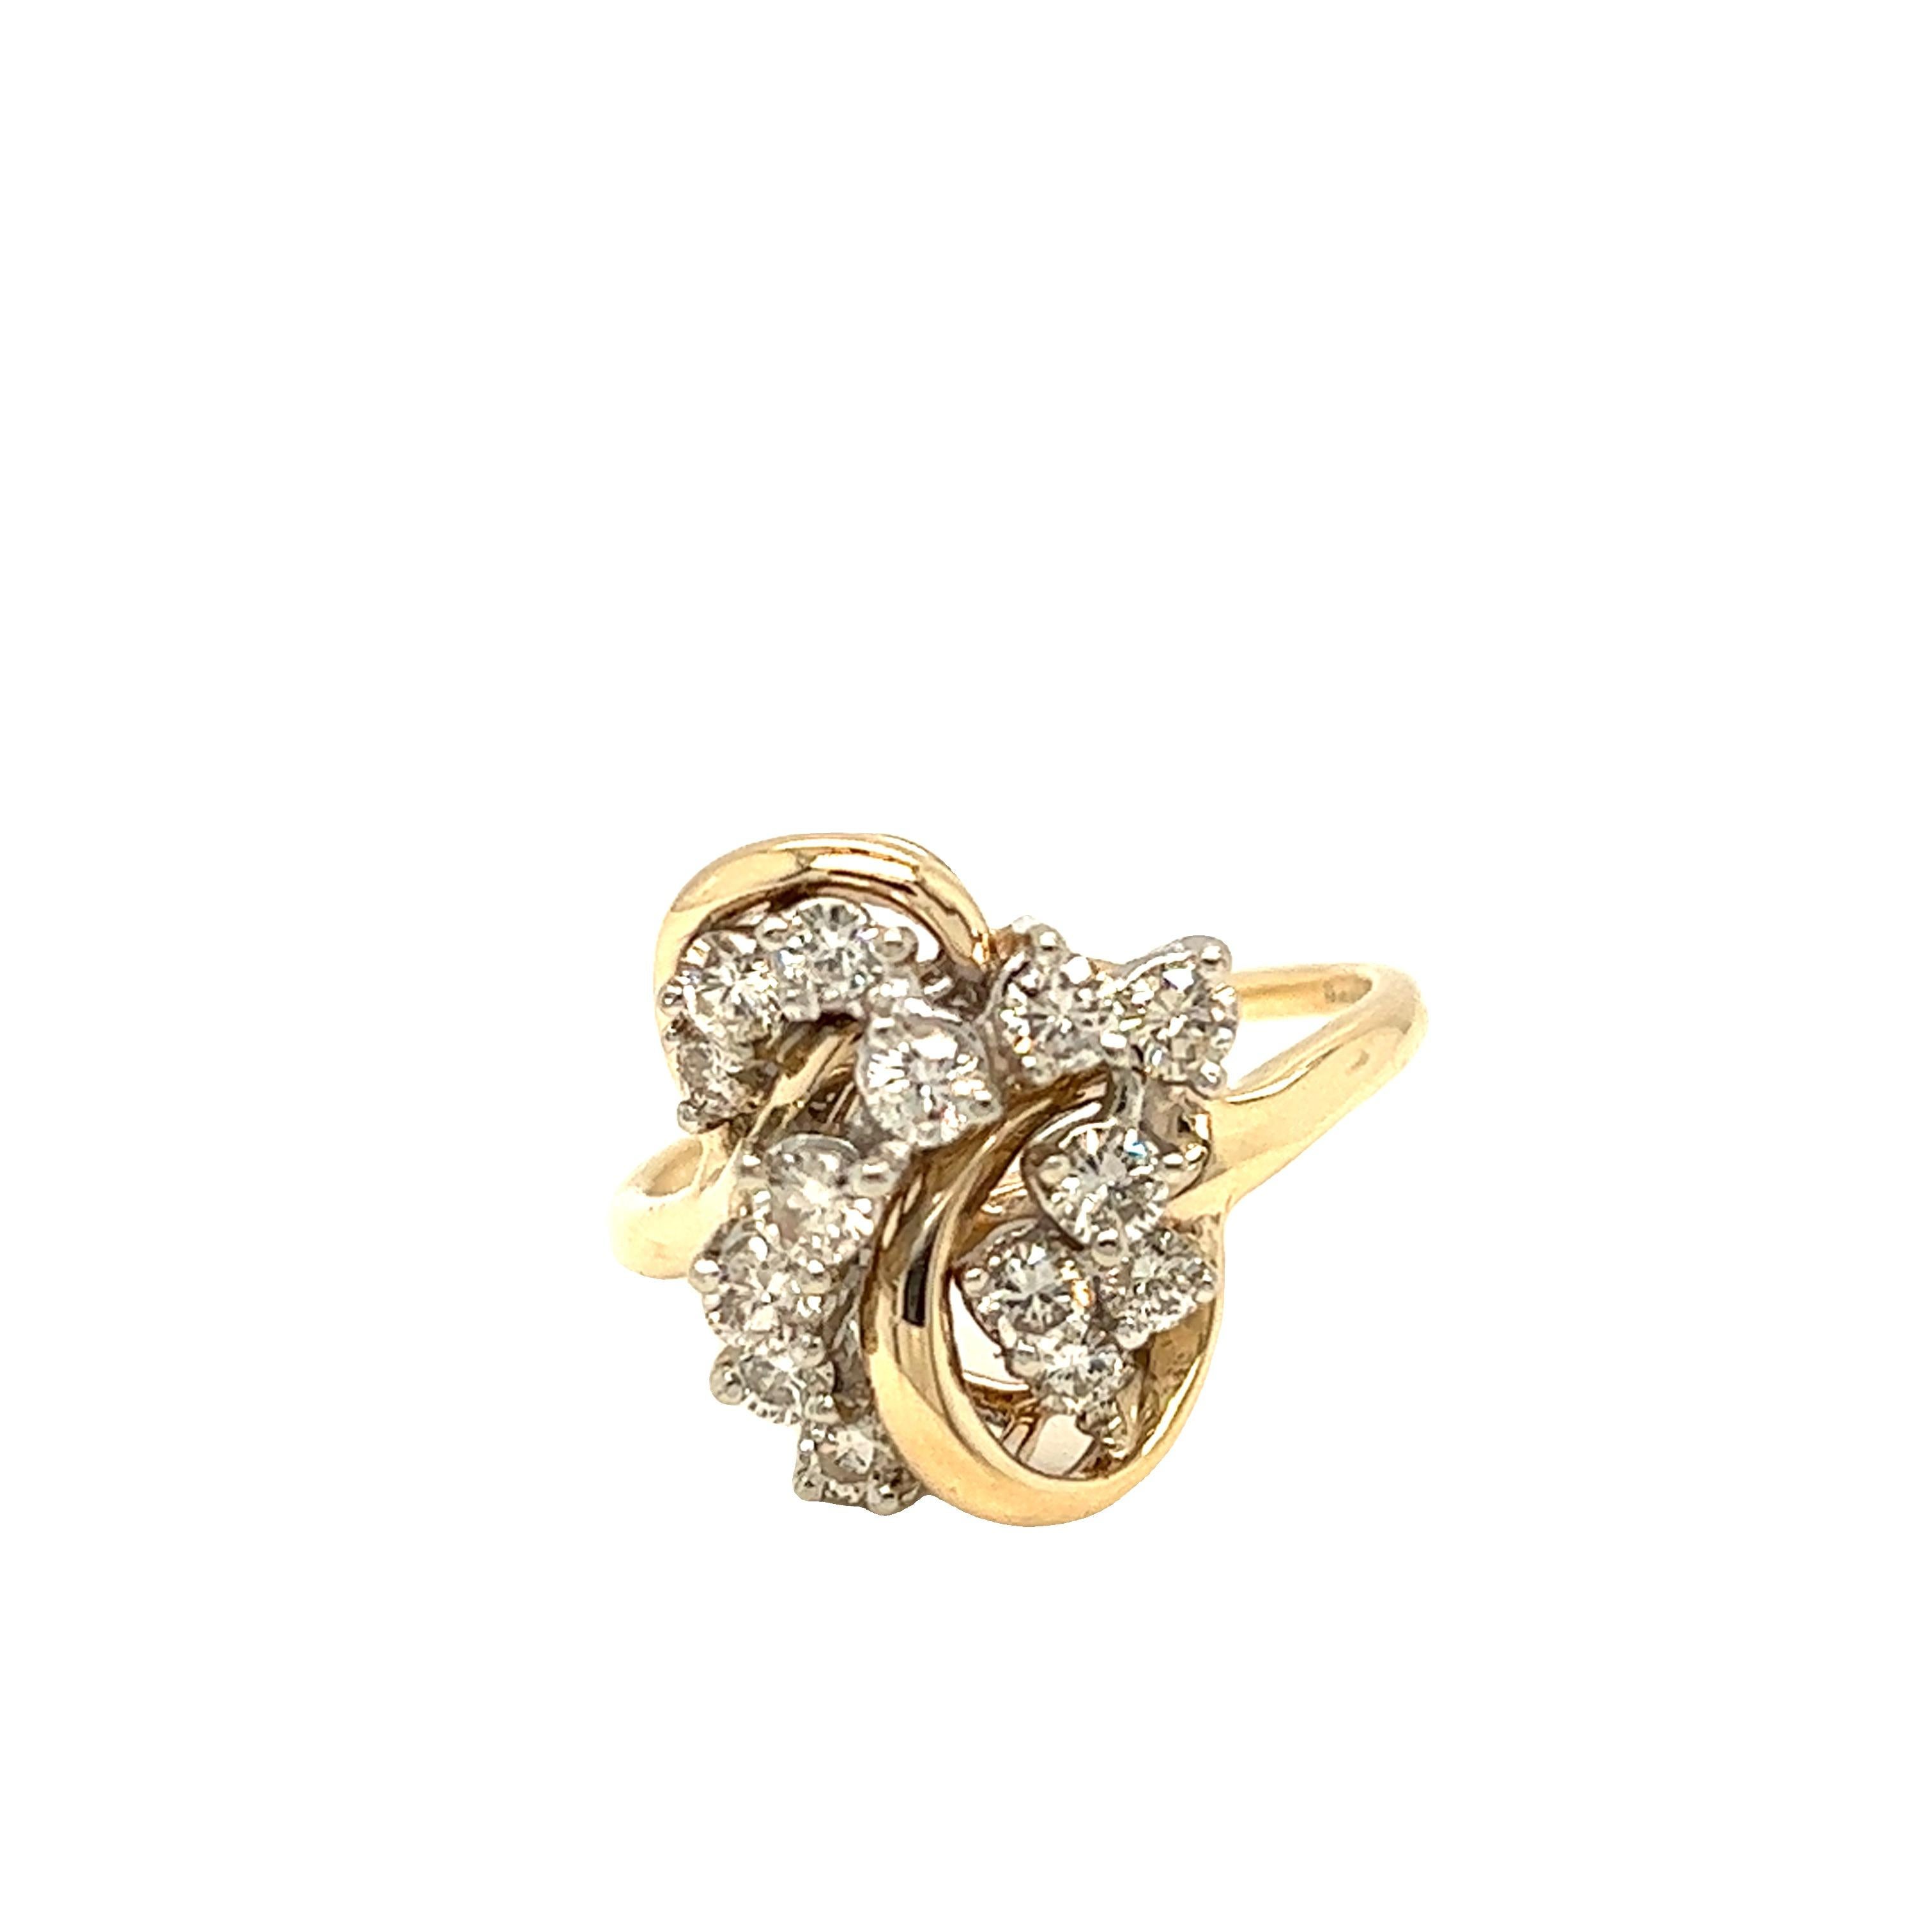 This finely crafted piece features a ribbon design with 14 diamonds weighing approximately 1.20 carat, H color and SI1 clarity. The cluster diamonds are set in 14k white gold while the rest of the ring is in 14k yellow gold. Currently in a size 8.25